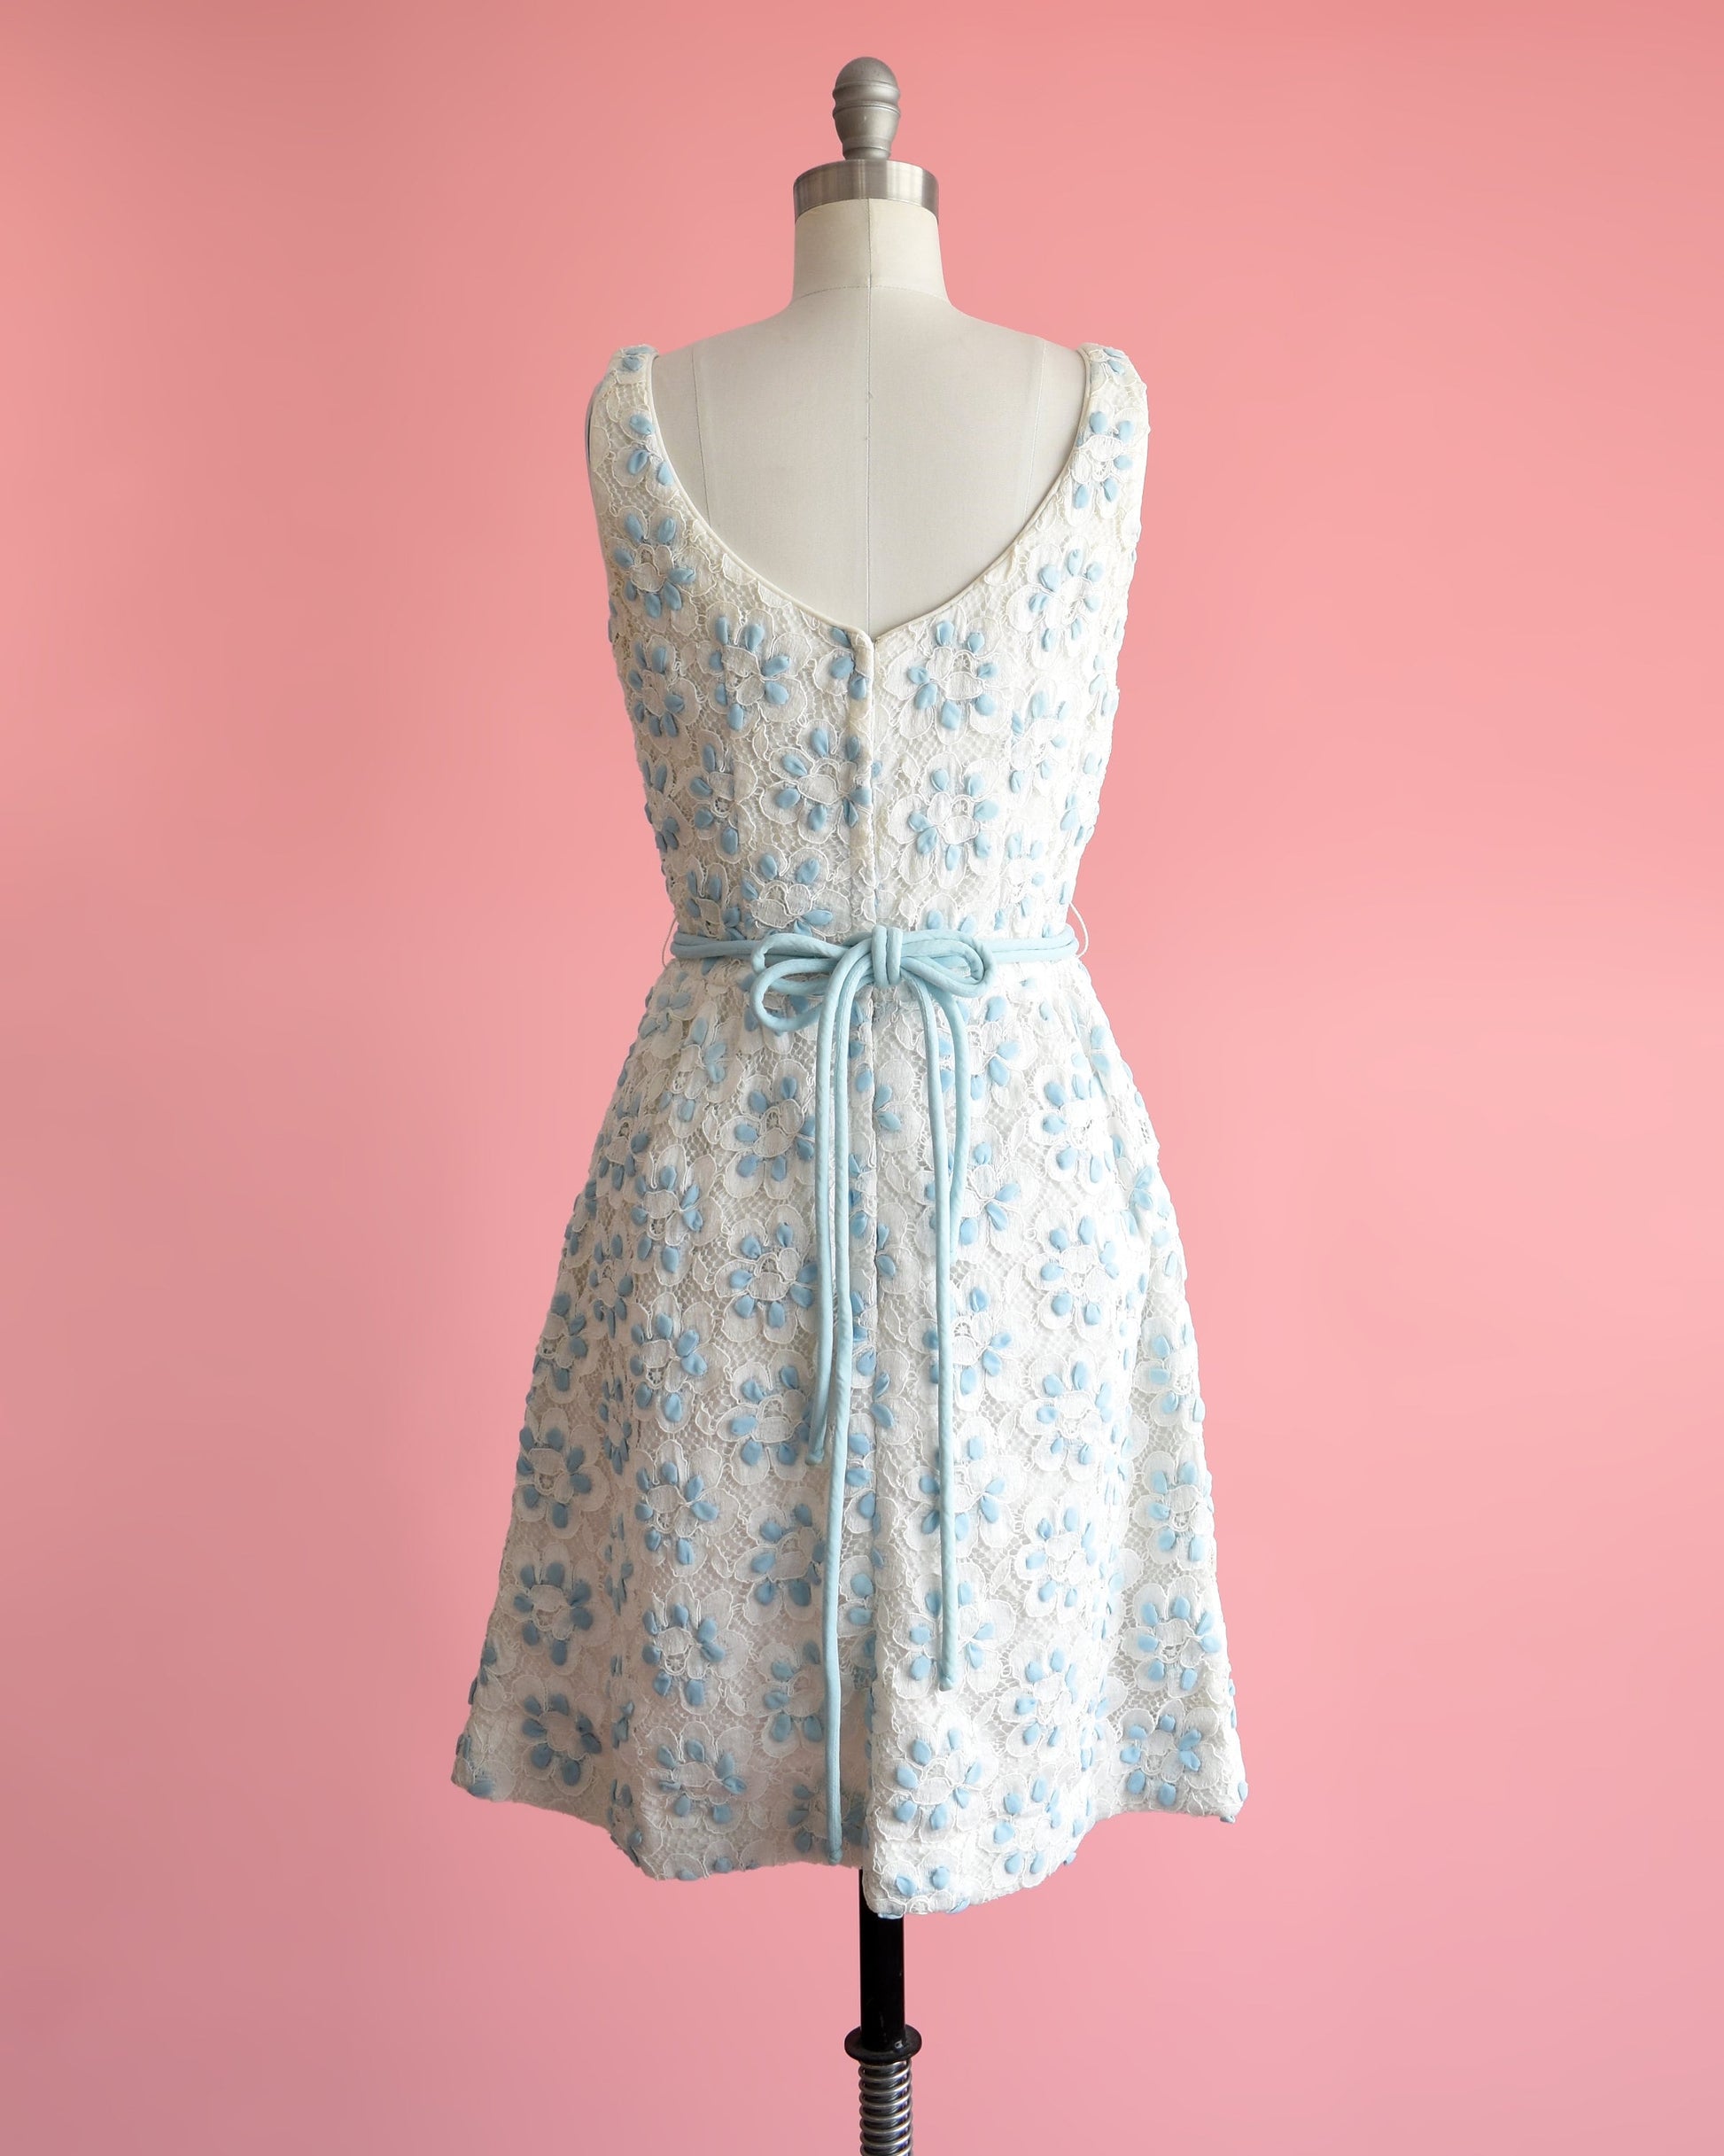 Back view of a vintage 60s white and blue floral lace dress that is sleeveless with a scoop neckline. Fitted waist with a matching double blue rope tie belt. Flared out skirt. Dress is modeled on a dress form